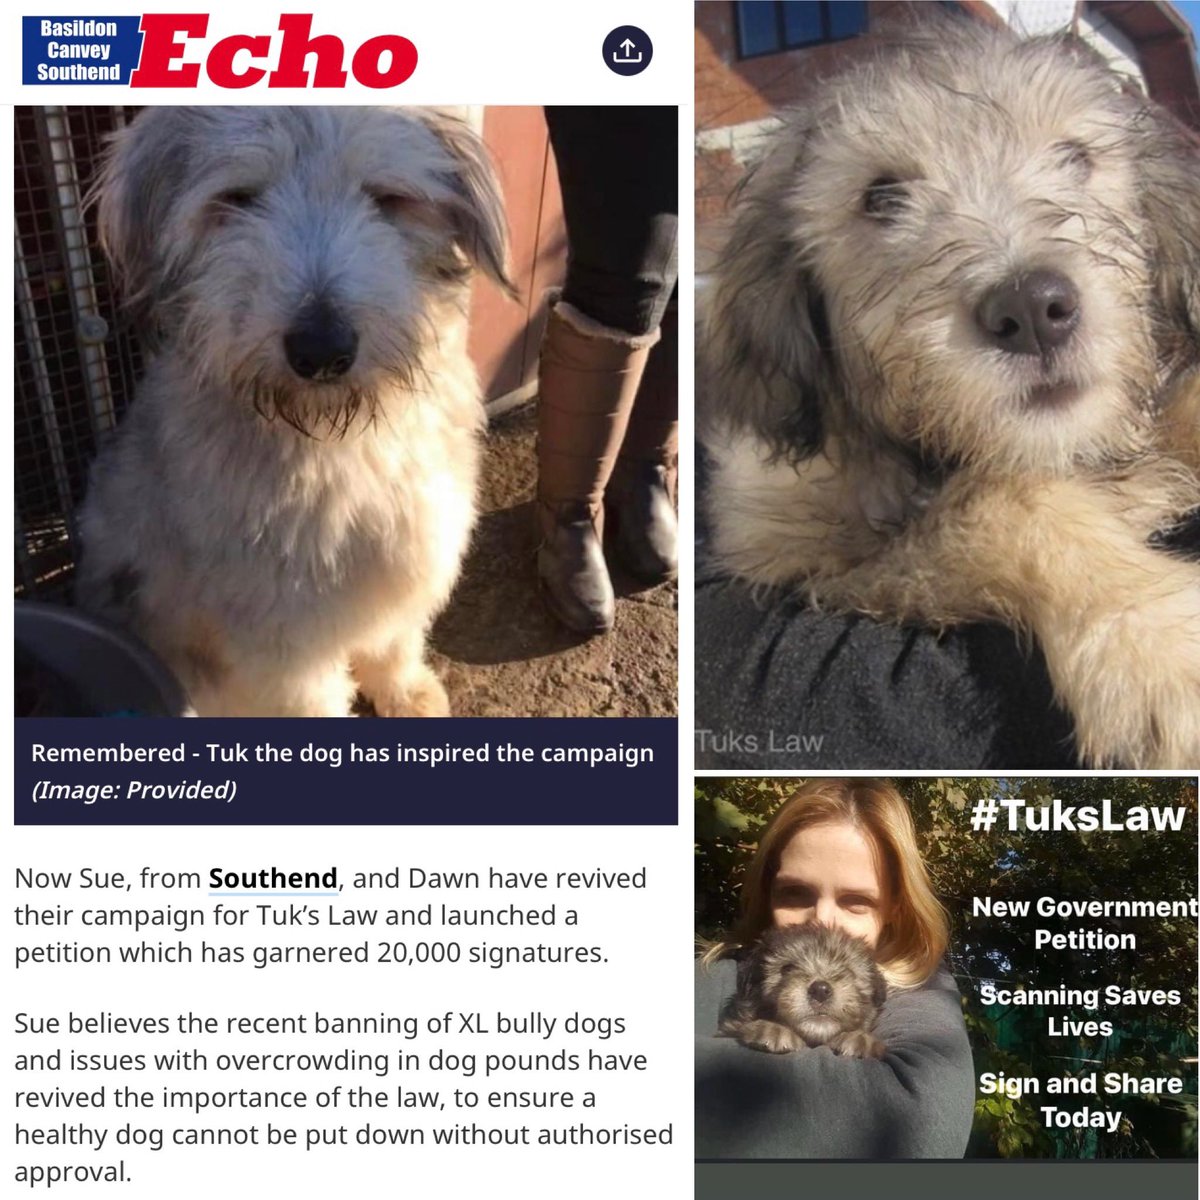 We are hugely grateful to the @Essex_Echo for continuing to support our campaign and help us get to Westminster

echo-news.co.uk/news/24278418.…

Petition Link

petition.parliament.uk/petitions/6581…

2 people can sign from 1 email address so please ask a family member to sign as well
@RebeccaHarrisMP